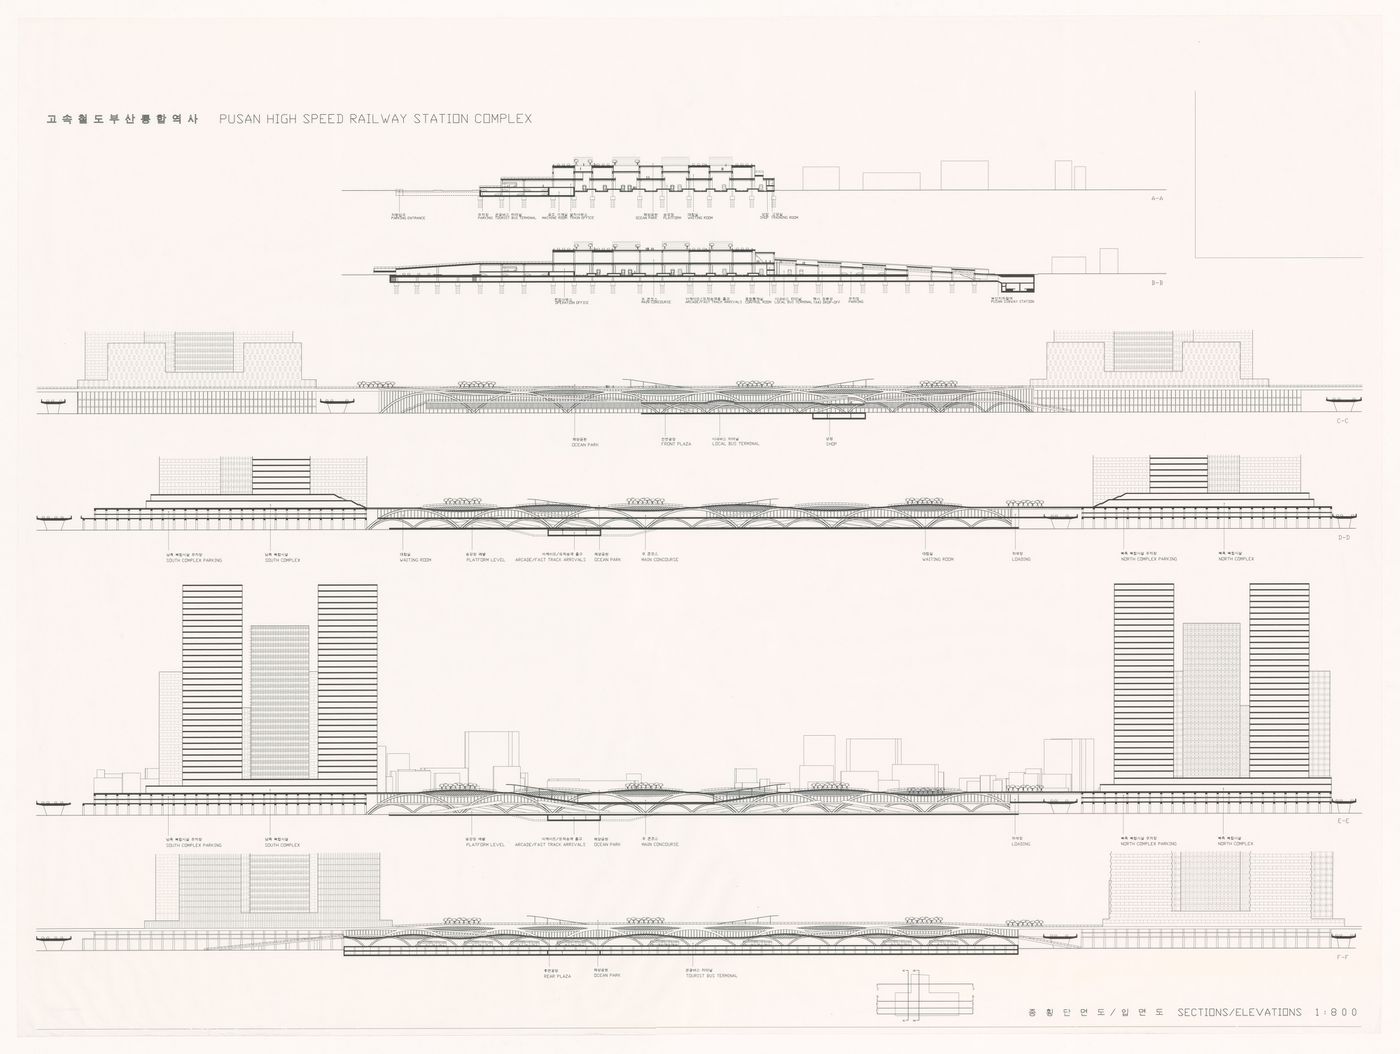 Sections and elevations for High-Speed Railway Complex, Busan, South Korea